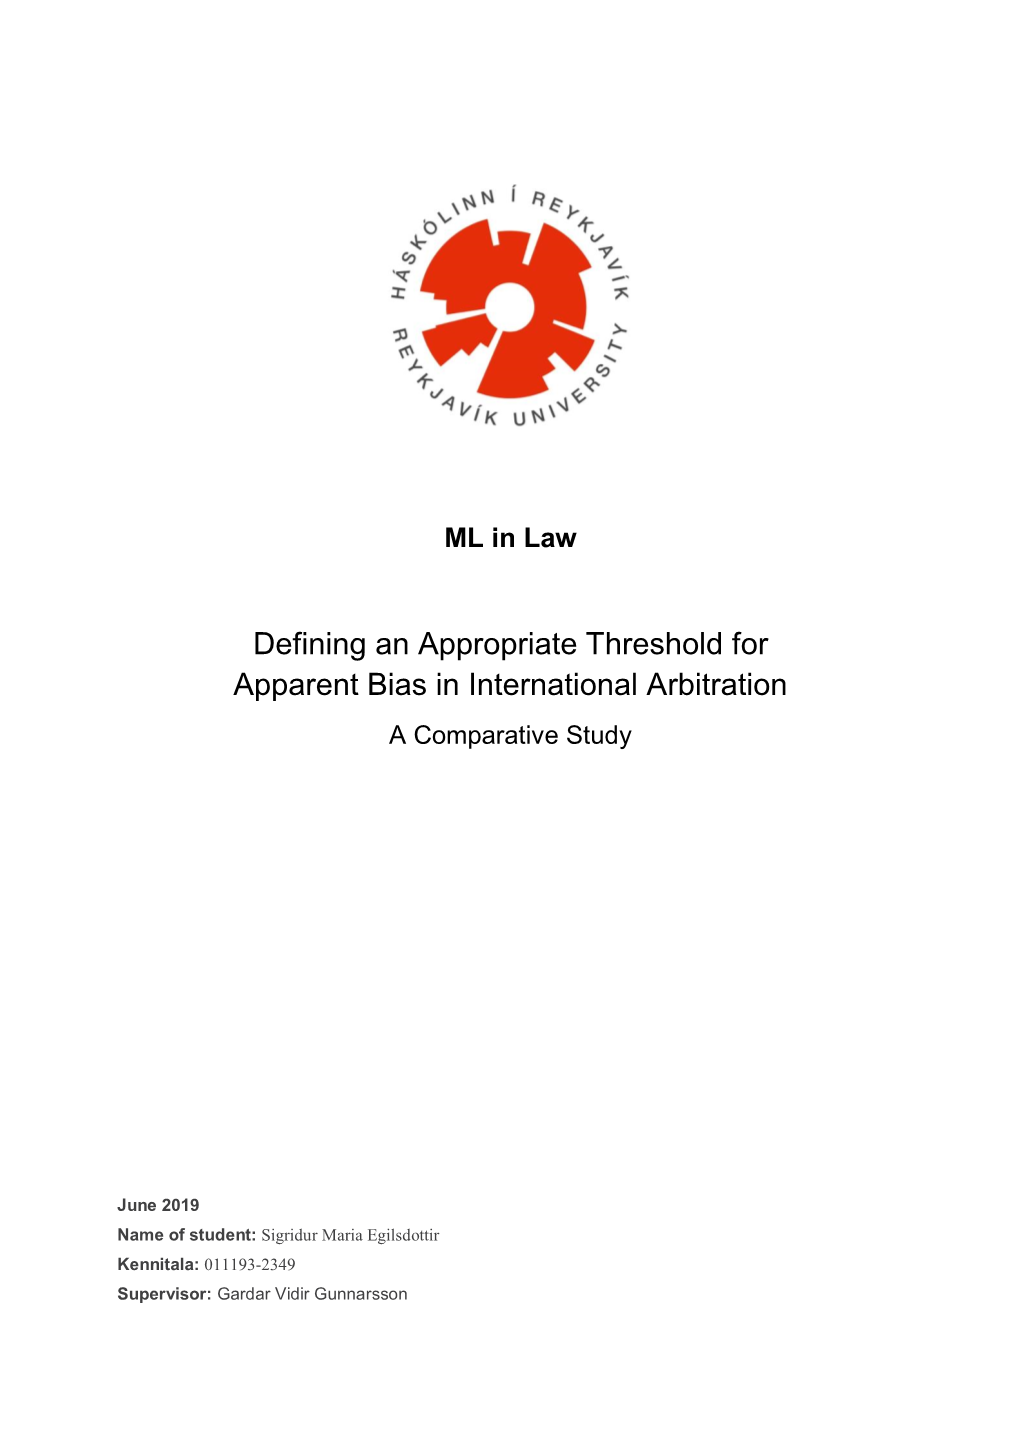 Defining an Appropriate Threshold for Apparent Bias in International Arbitration a Comparative Study